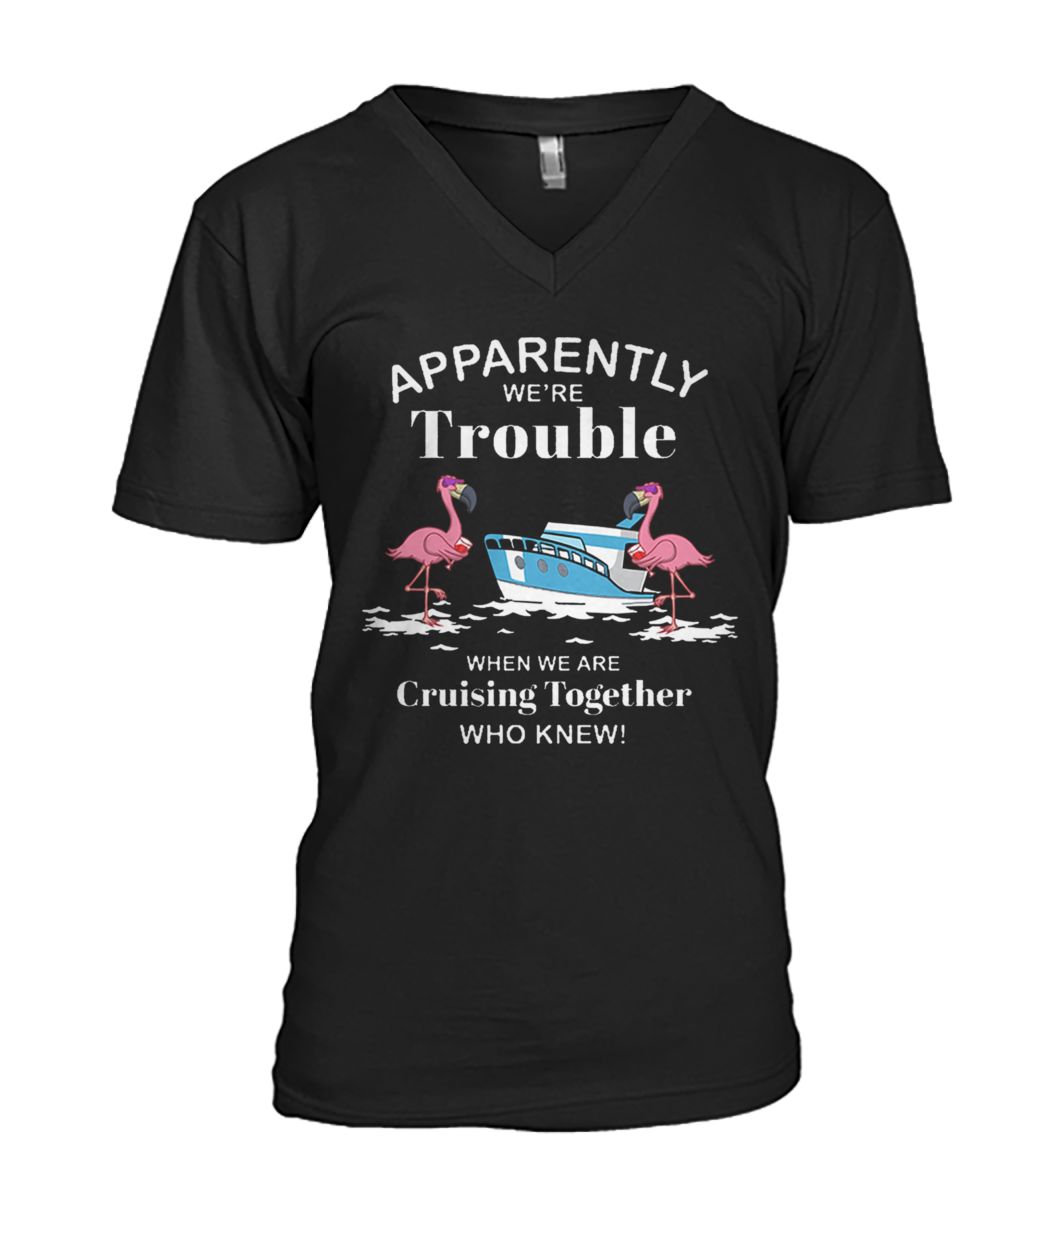 Apparently we're trouble when we are cruising together who knew flamingo mens v-neck